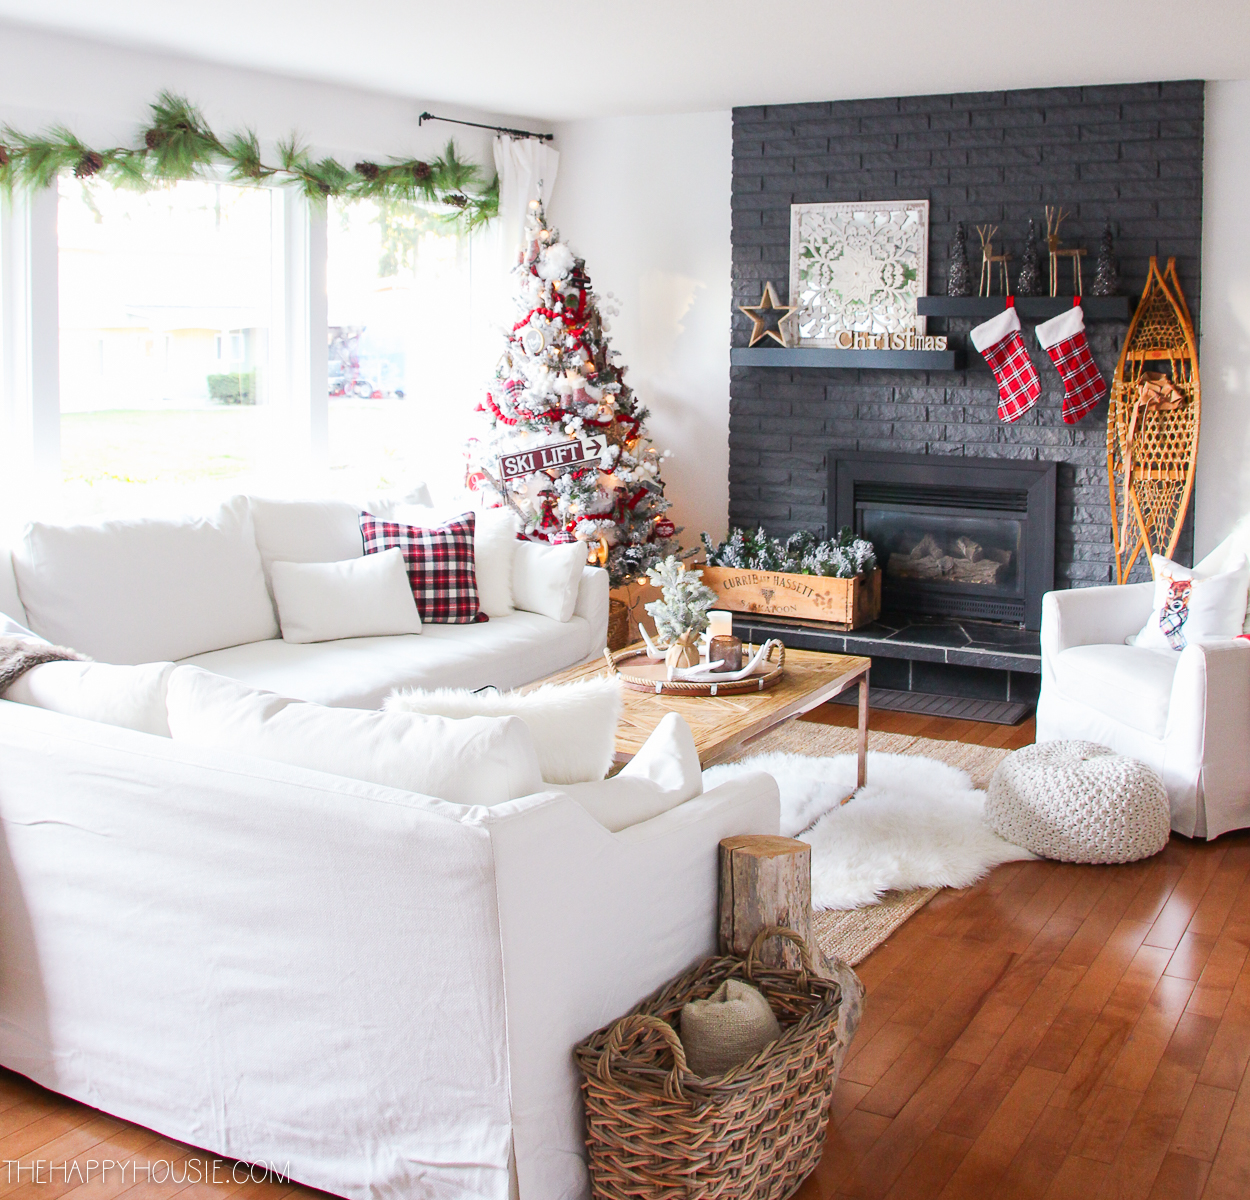 https://www.thehappyhousie.com/wp-content/uploads/2018/12/red-and-white-christmas-decorating-ideas-christmas-living-room-tour-at-the-happy-housie-35.jpg